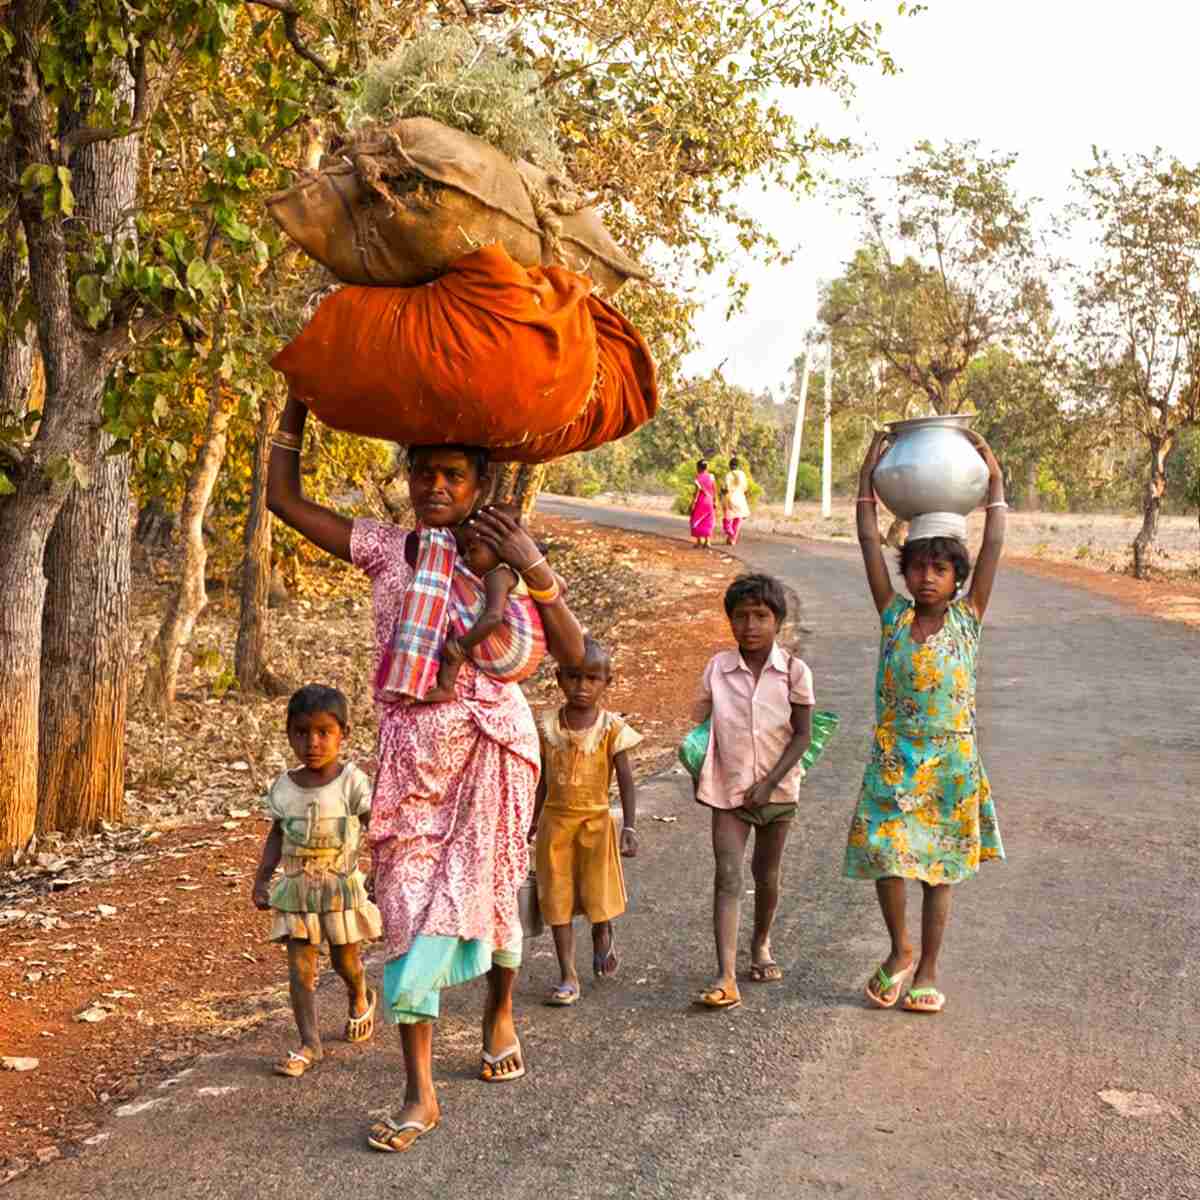 This mother and her five children are returning home from a ten-hour work day in the fields